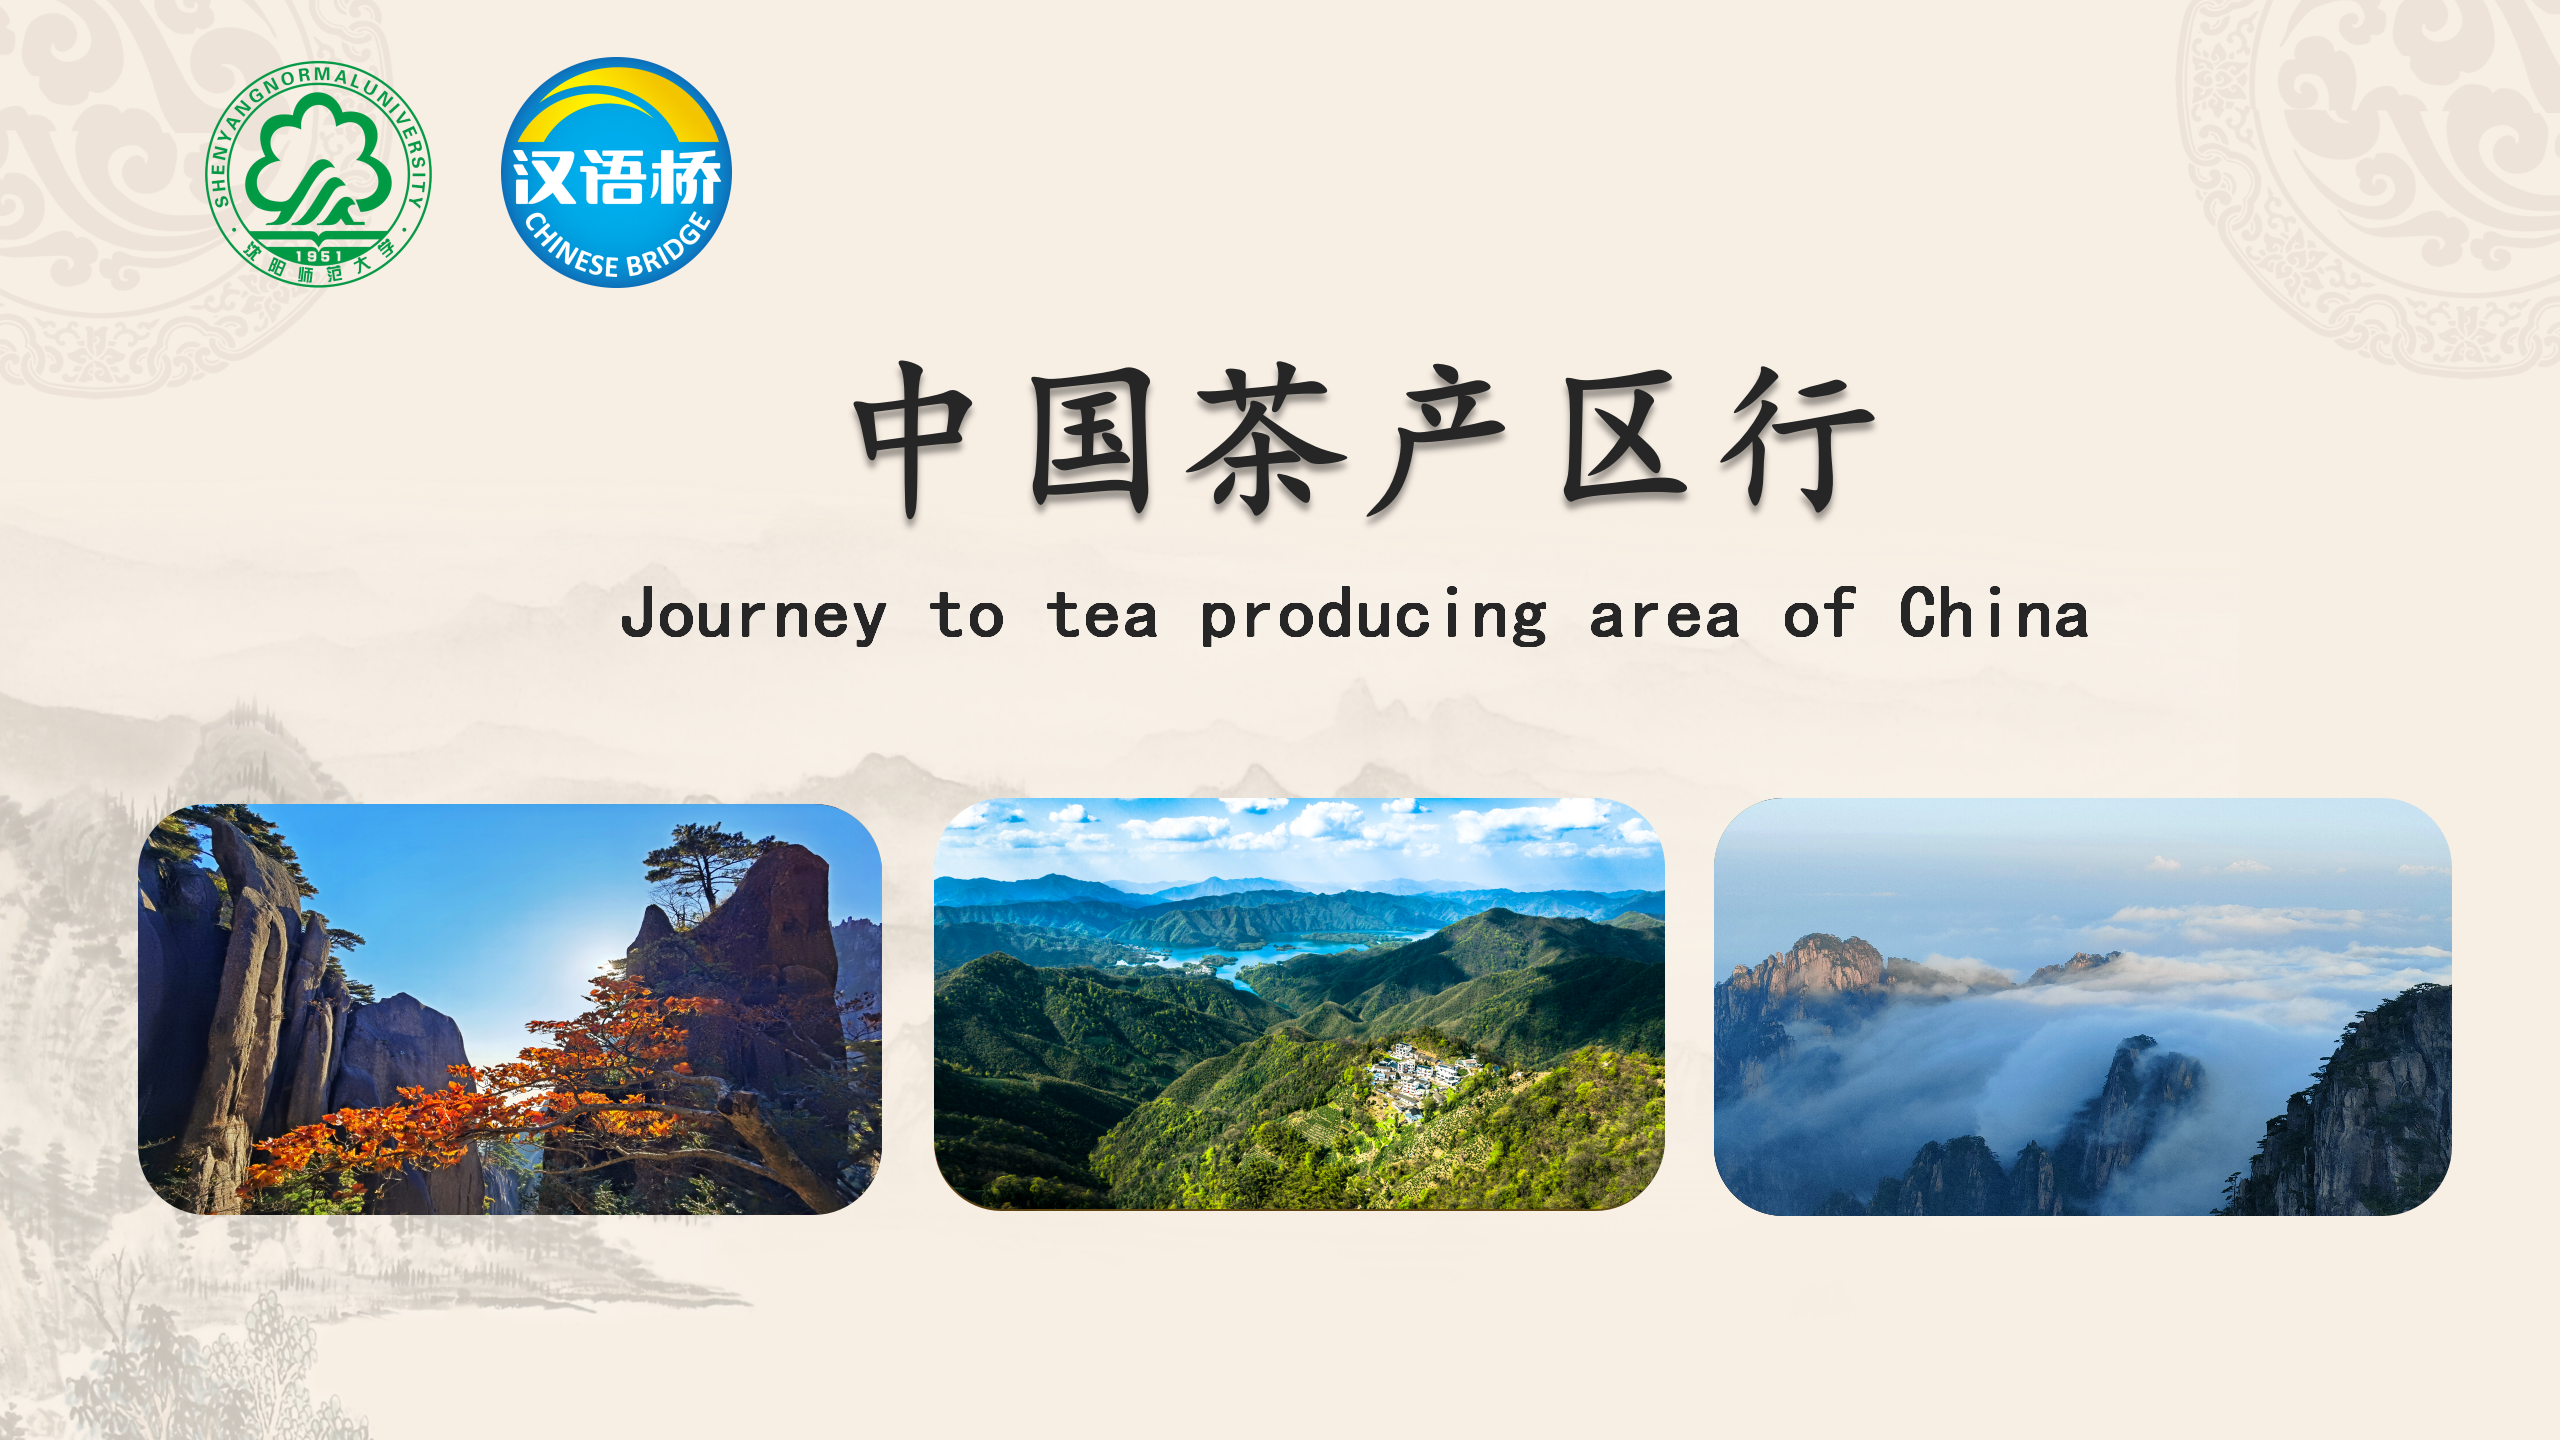 Journey to tea producing area of China